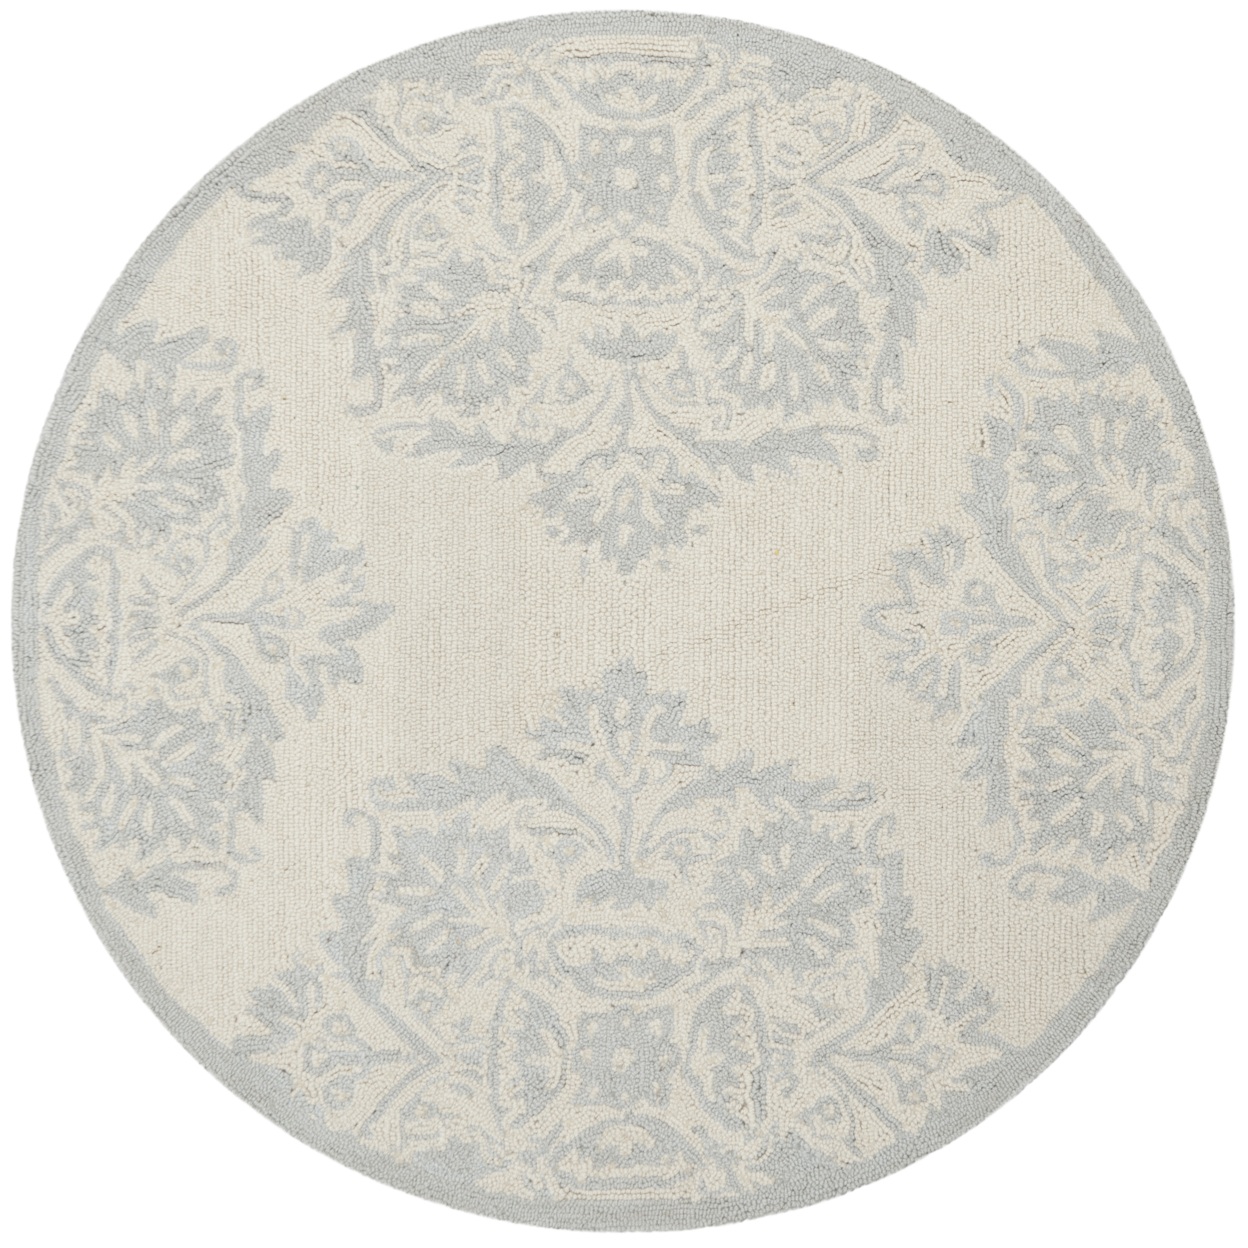 SAFAVIEH Chelsea HK359A Hand-hooked Ivory / Blue Rug - 8' Round